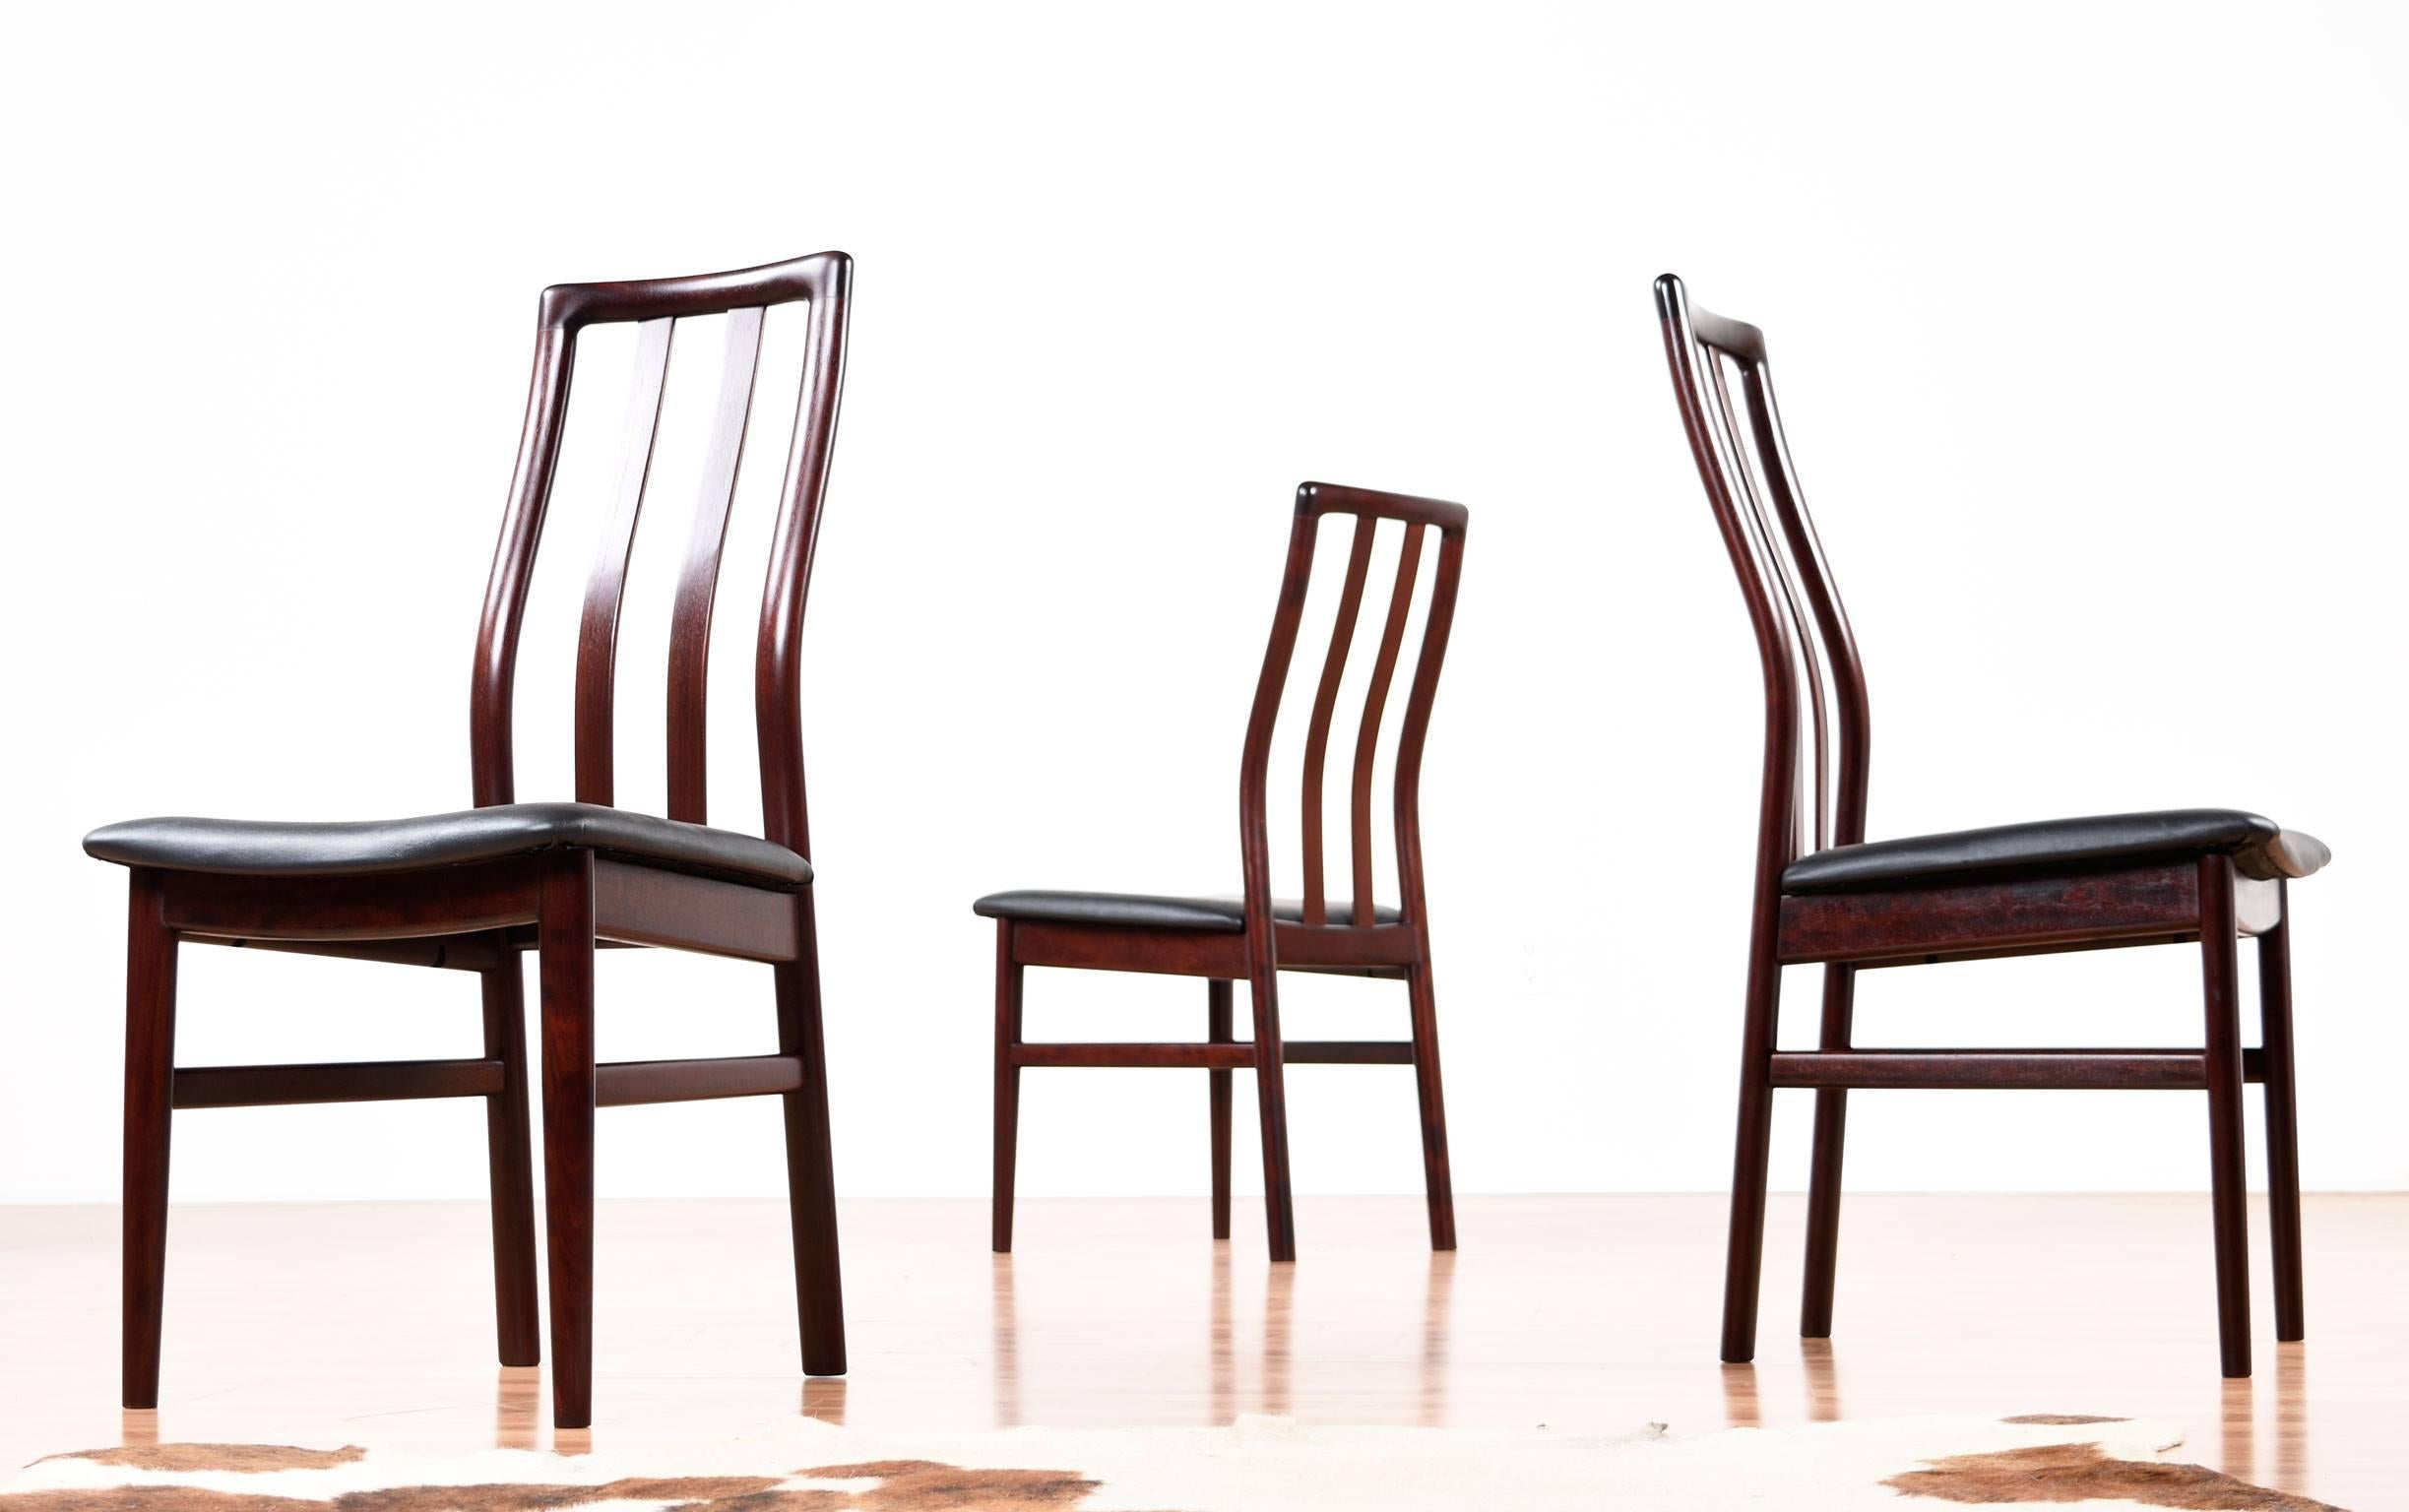 Set of six outstanding vintage, 1980s Scandinavian rosewood dining chairs. These chairs feature ergonomic design with a contoured back to support the natural curve of occupant's body. The rosewood is absolutely stunning with a deep red hue and sleek